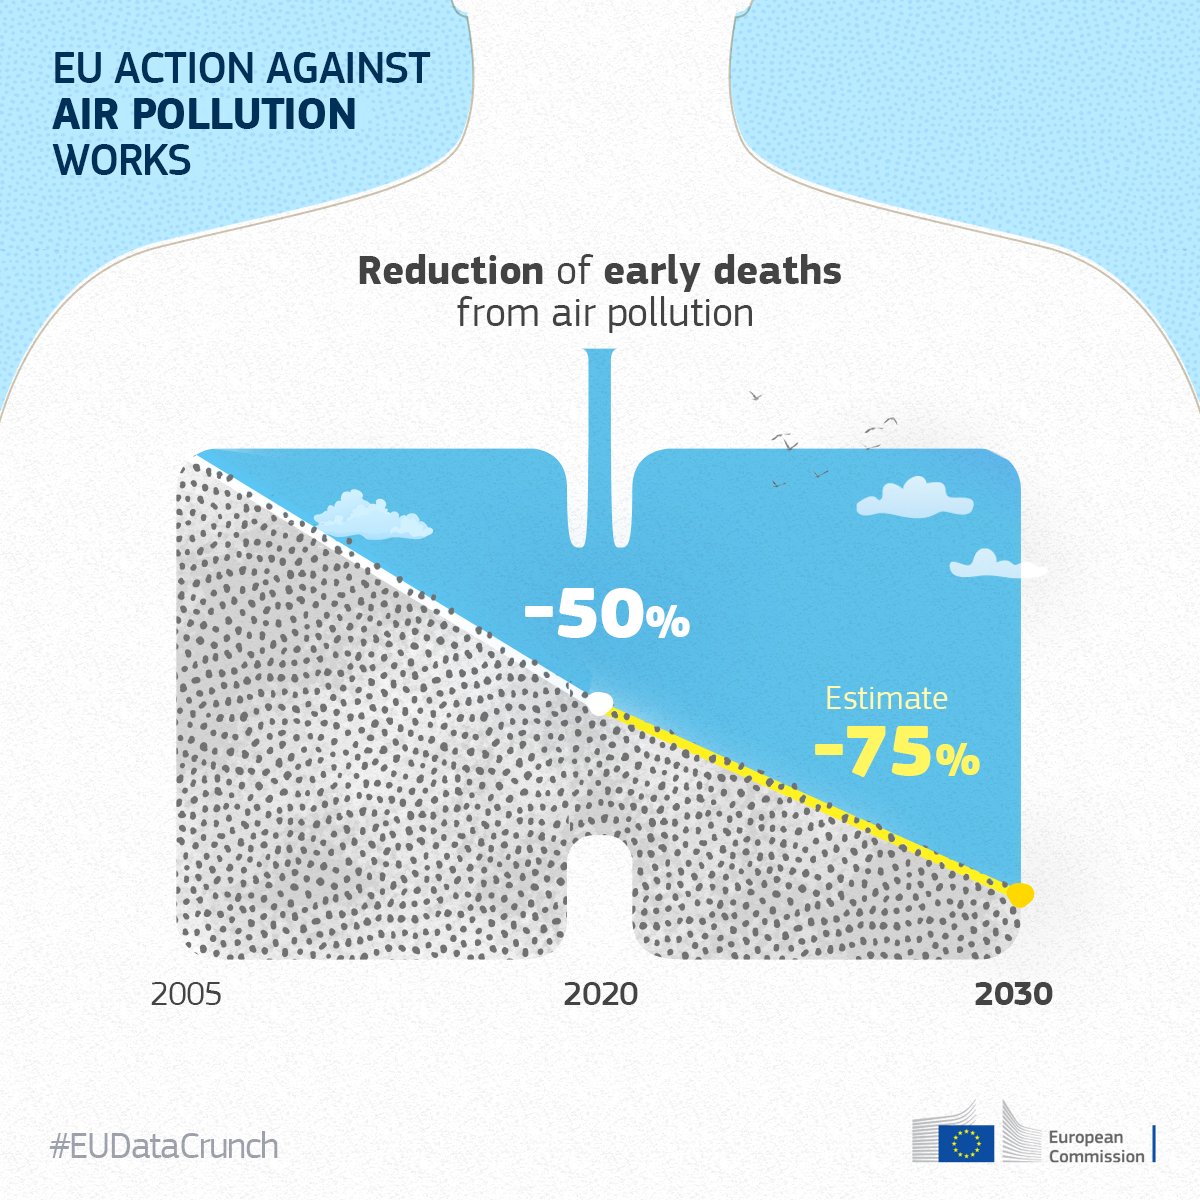 For cleaner air. We have made progress to clean up the air we breathe. But we need to do more. Our #ZeroPollution plan will help align EU air quality standards closely with @WHO guidelines by 2030. This means we can achieve our zero pollution aim for air by 2050 #EUDataCrunch